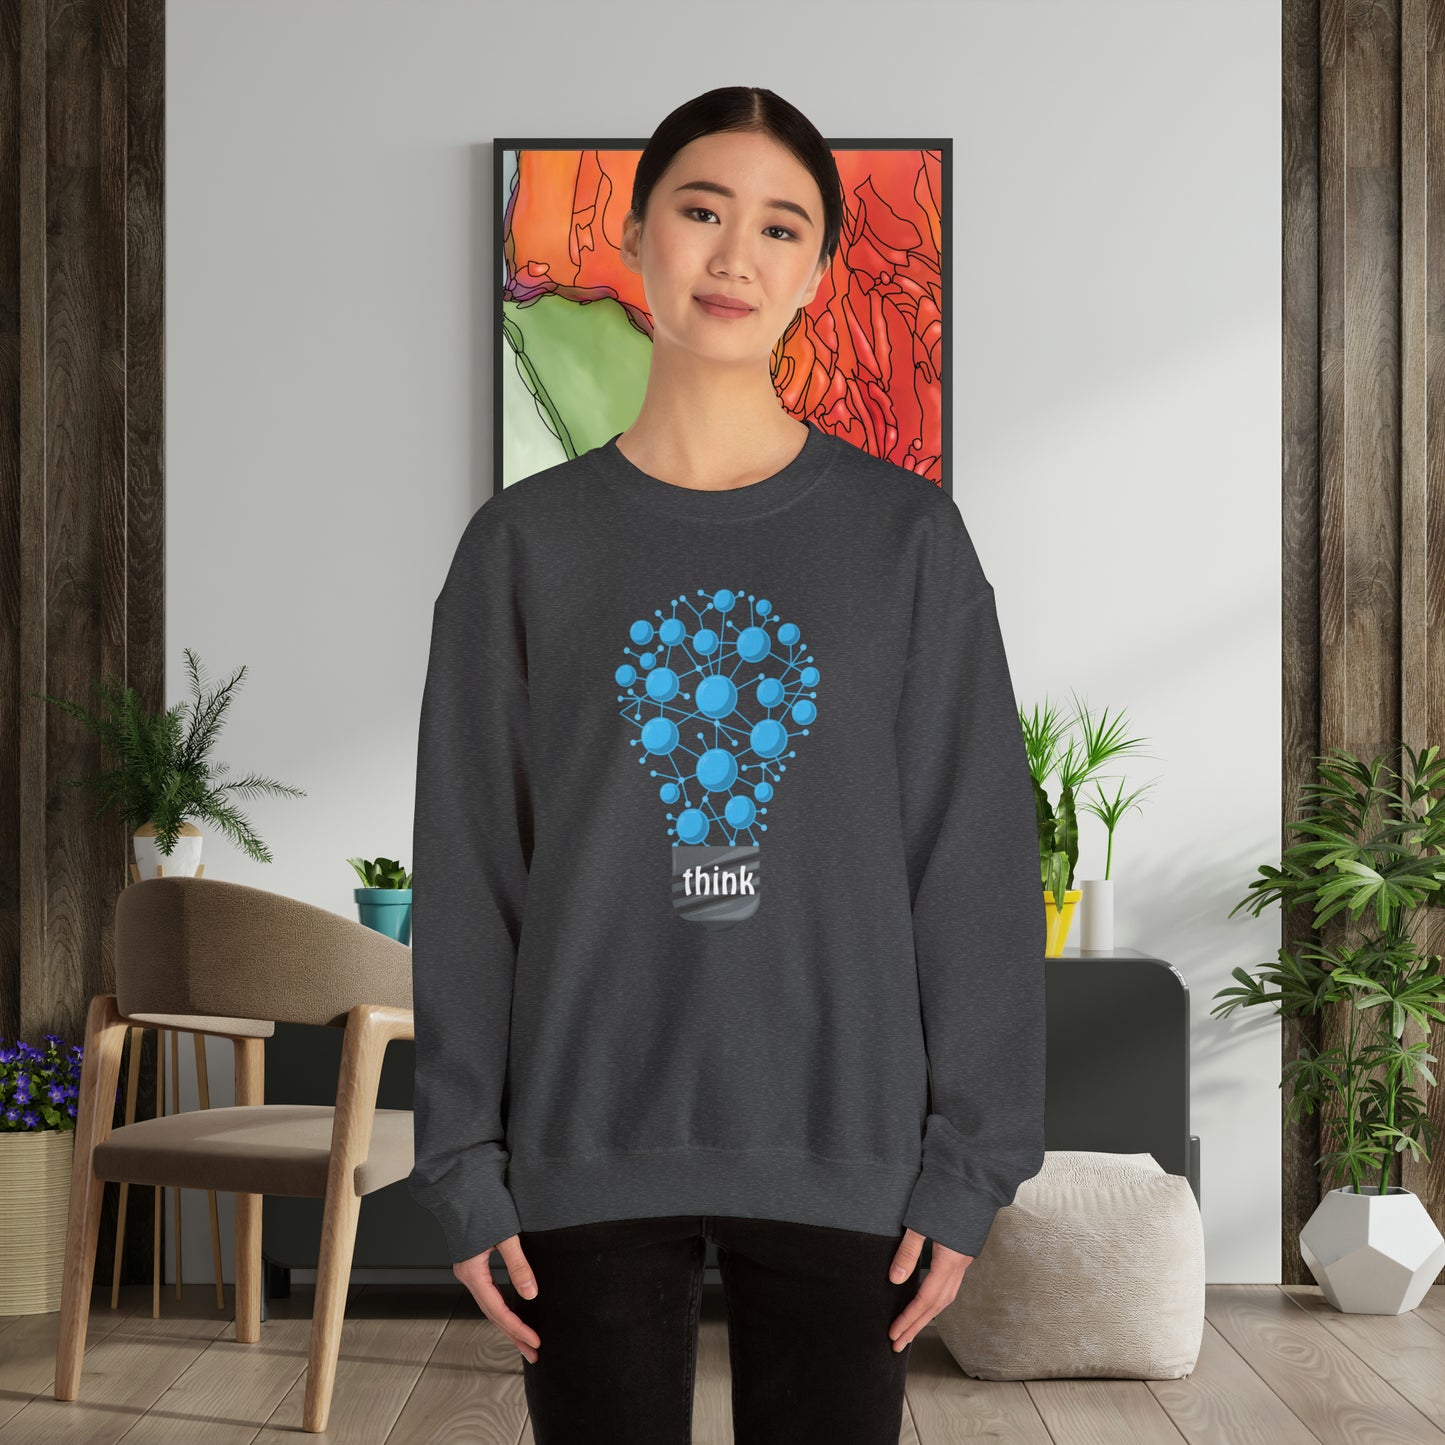 Don’t you love that aha moment when you “think” and figure things out? This sweatshirt encourages us to exercise our brains! Give the gift of this Unisex Heavy Blend™ Crewneck Sweatshirt or get one for yourself.